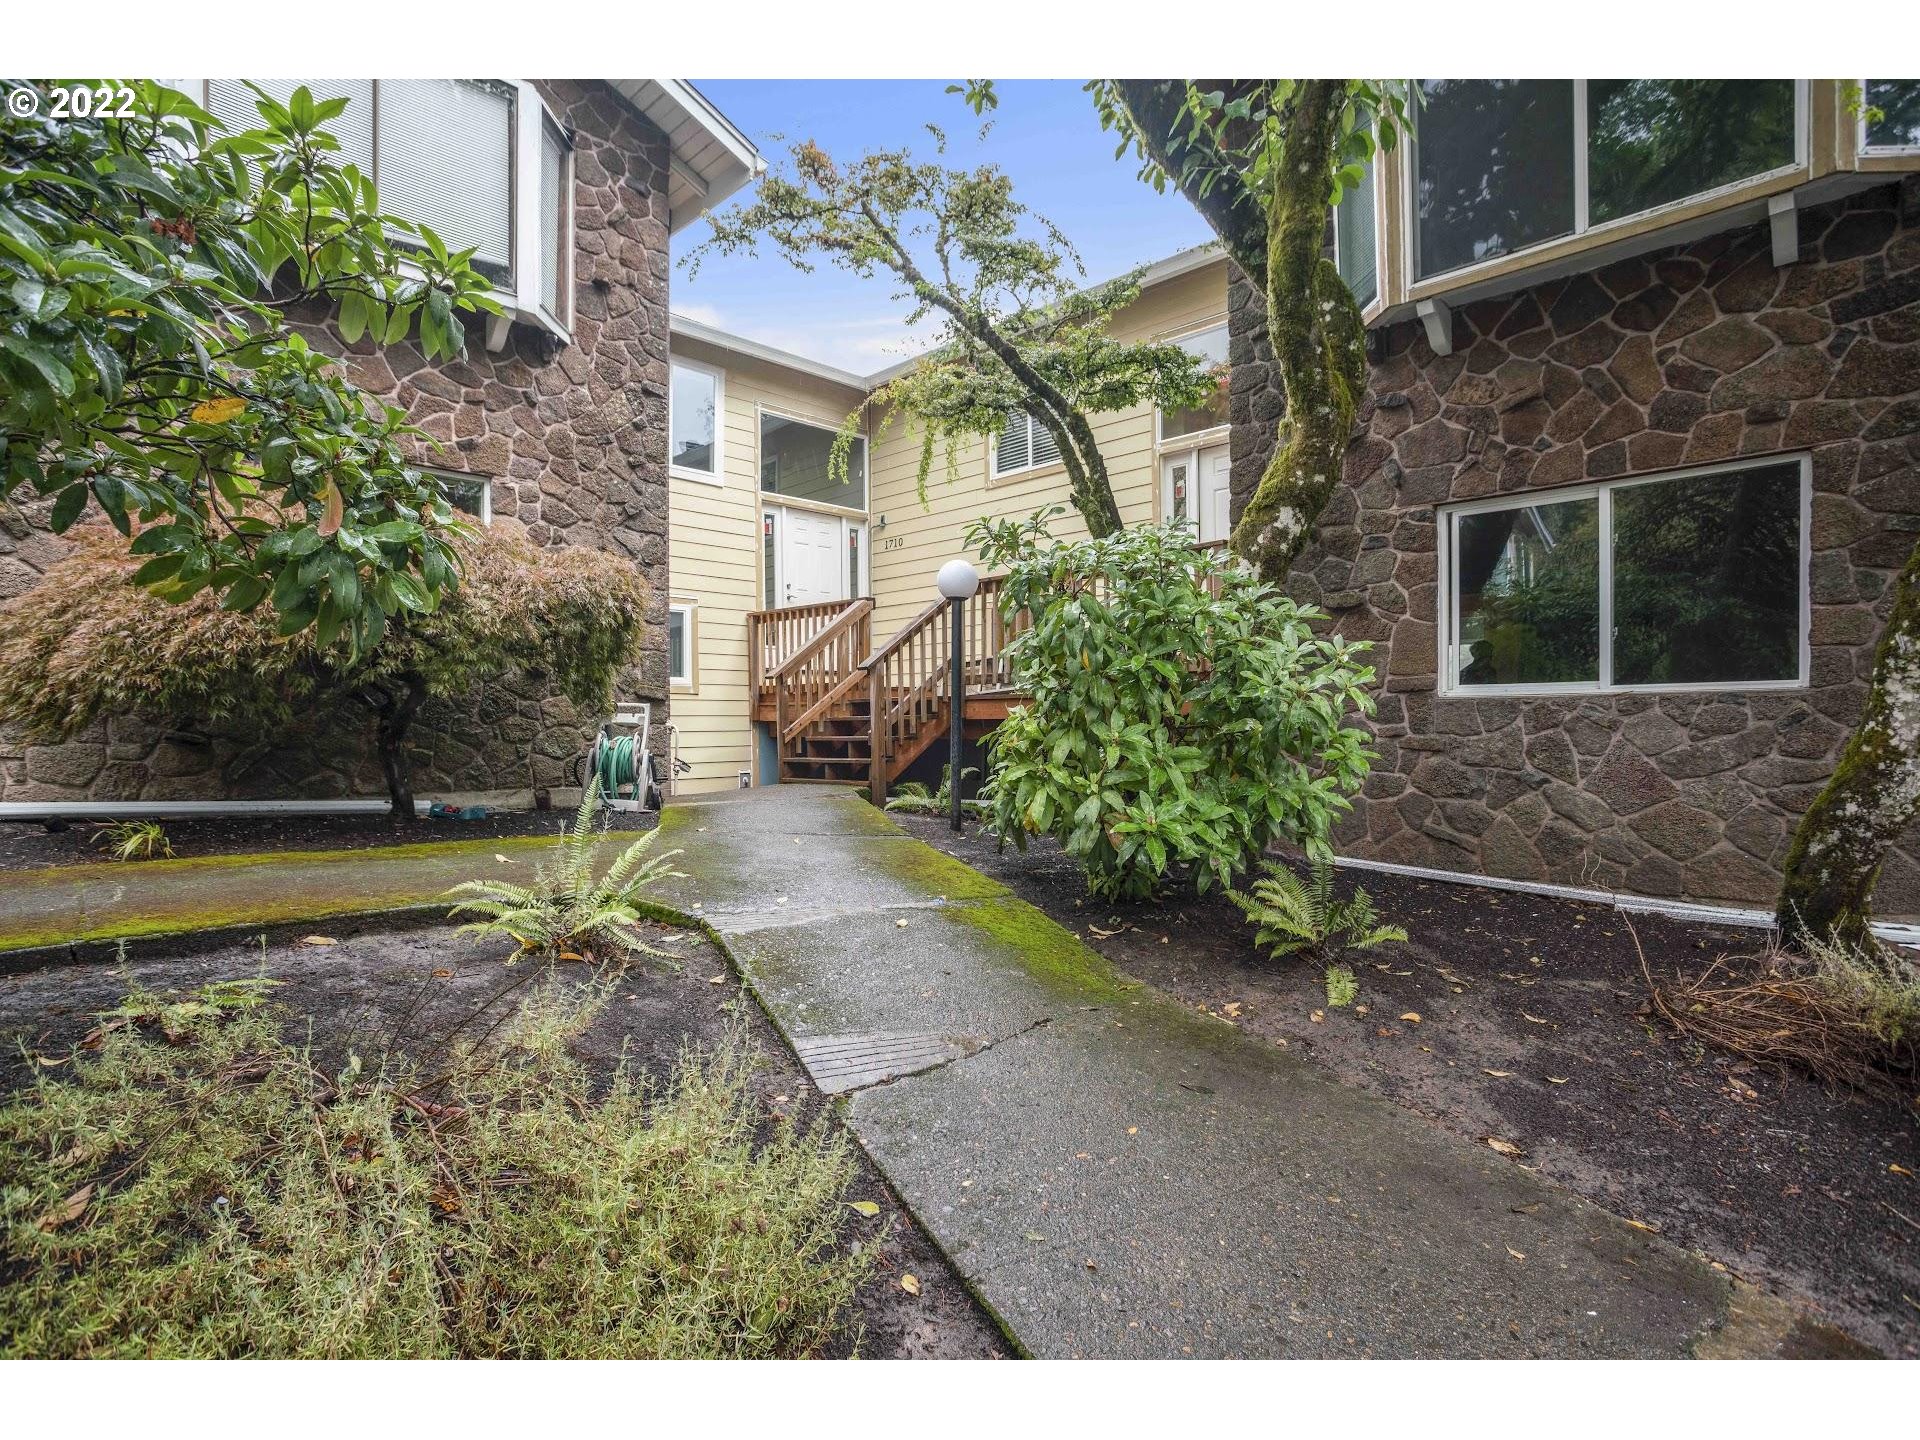 1710 SW 58TH AVE, Portland, OR 97221